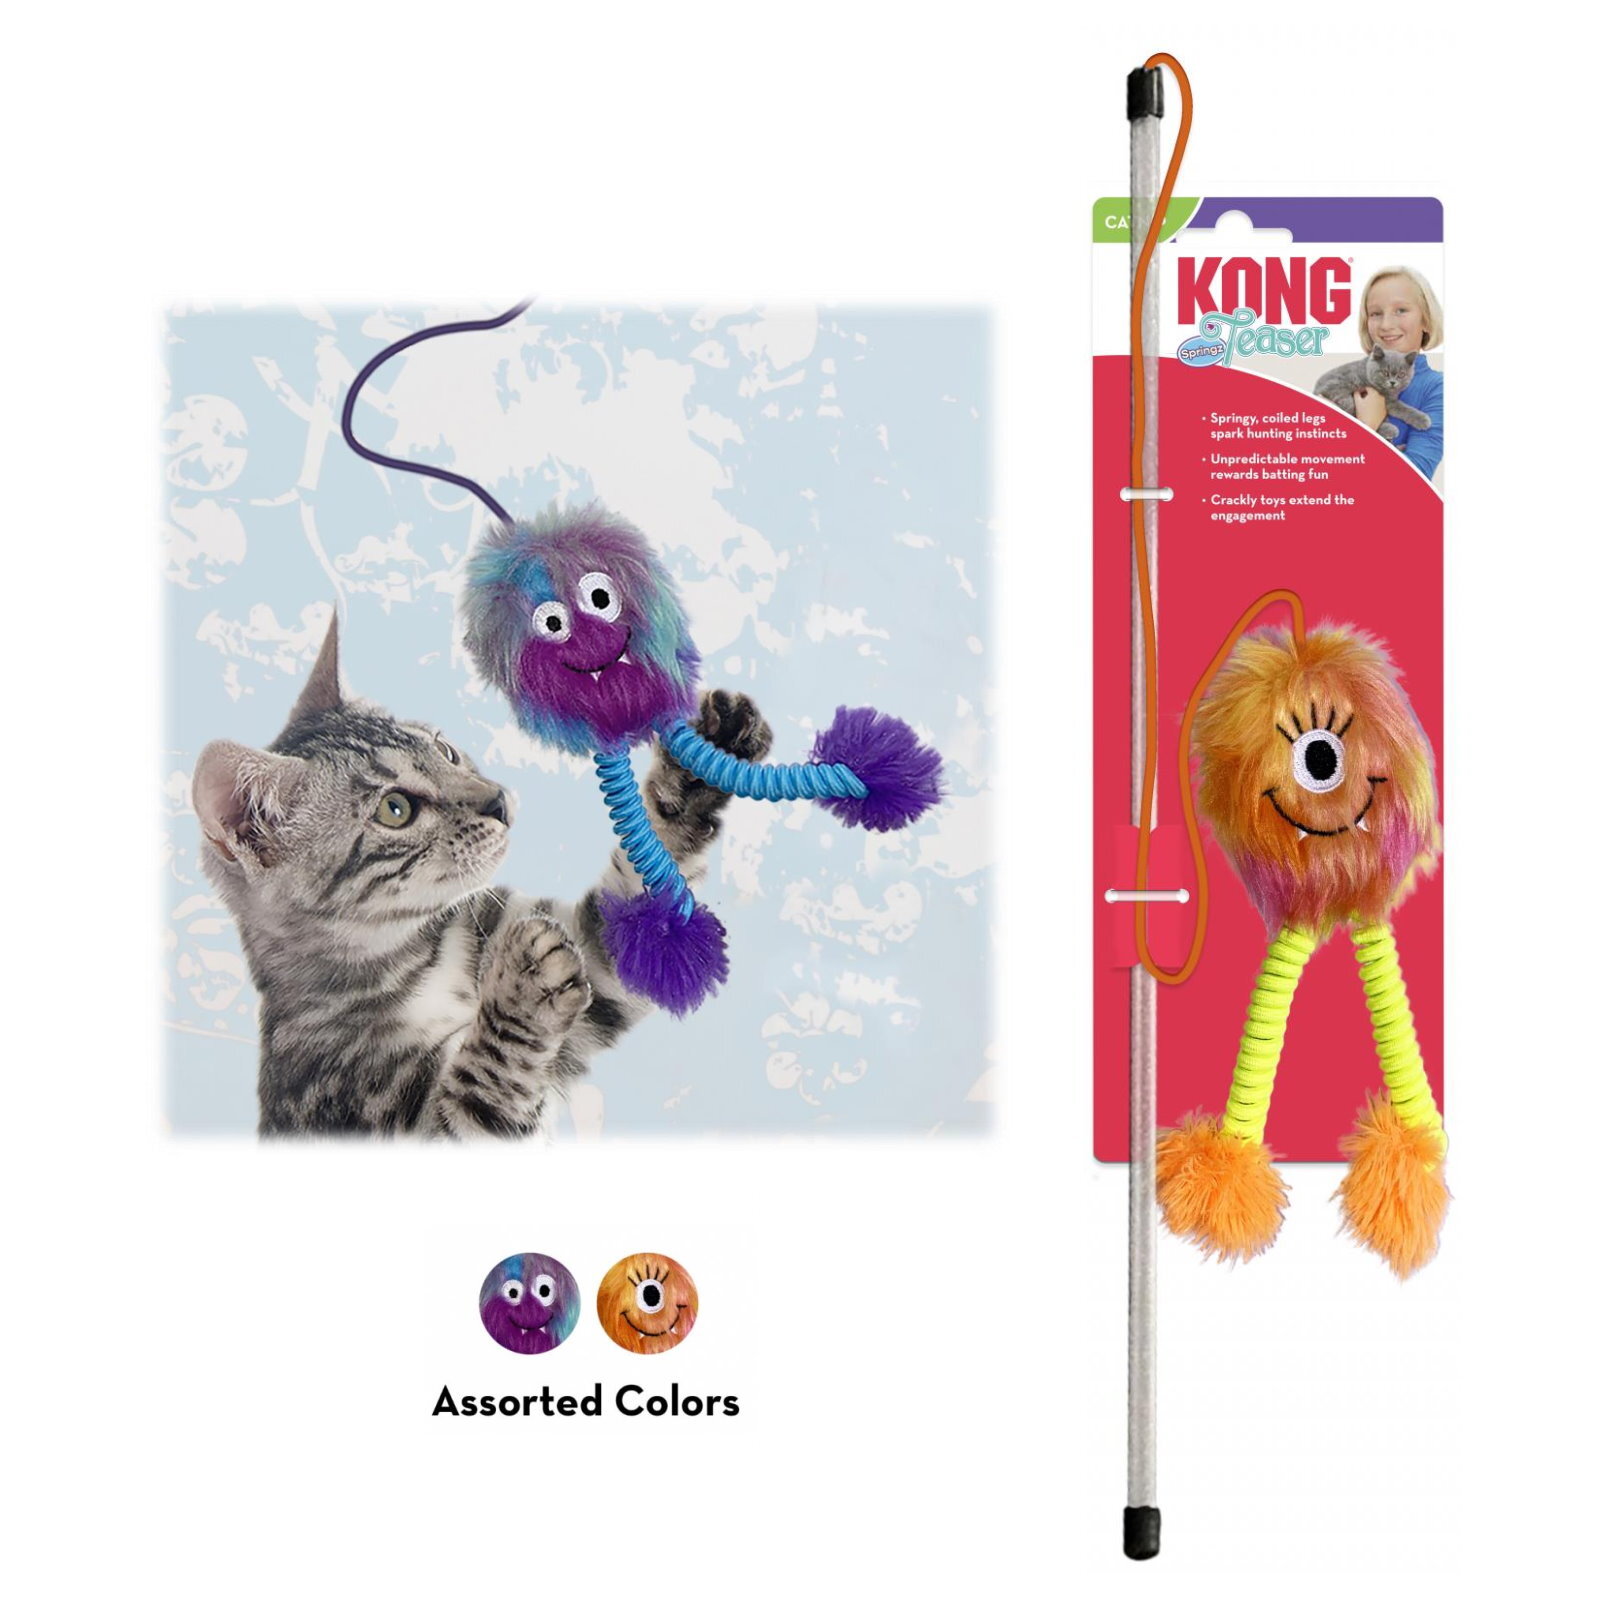 4 x KONG Teaser Springz Catnip Wand Toy for Cats - Assorted Colours image 0